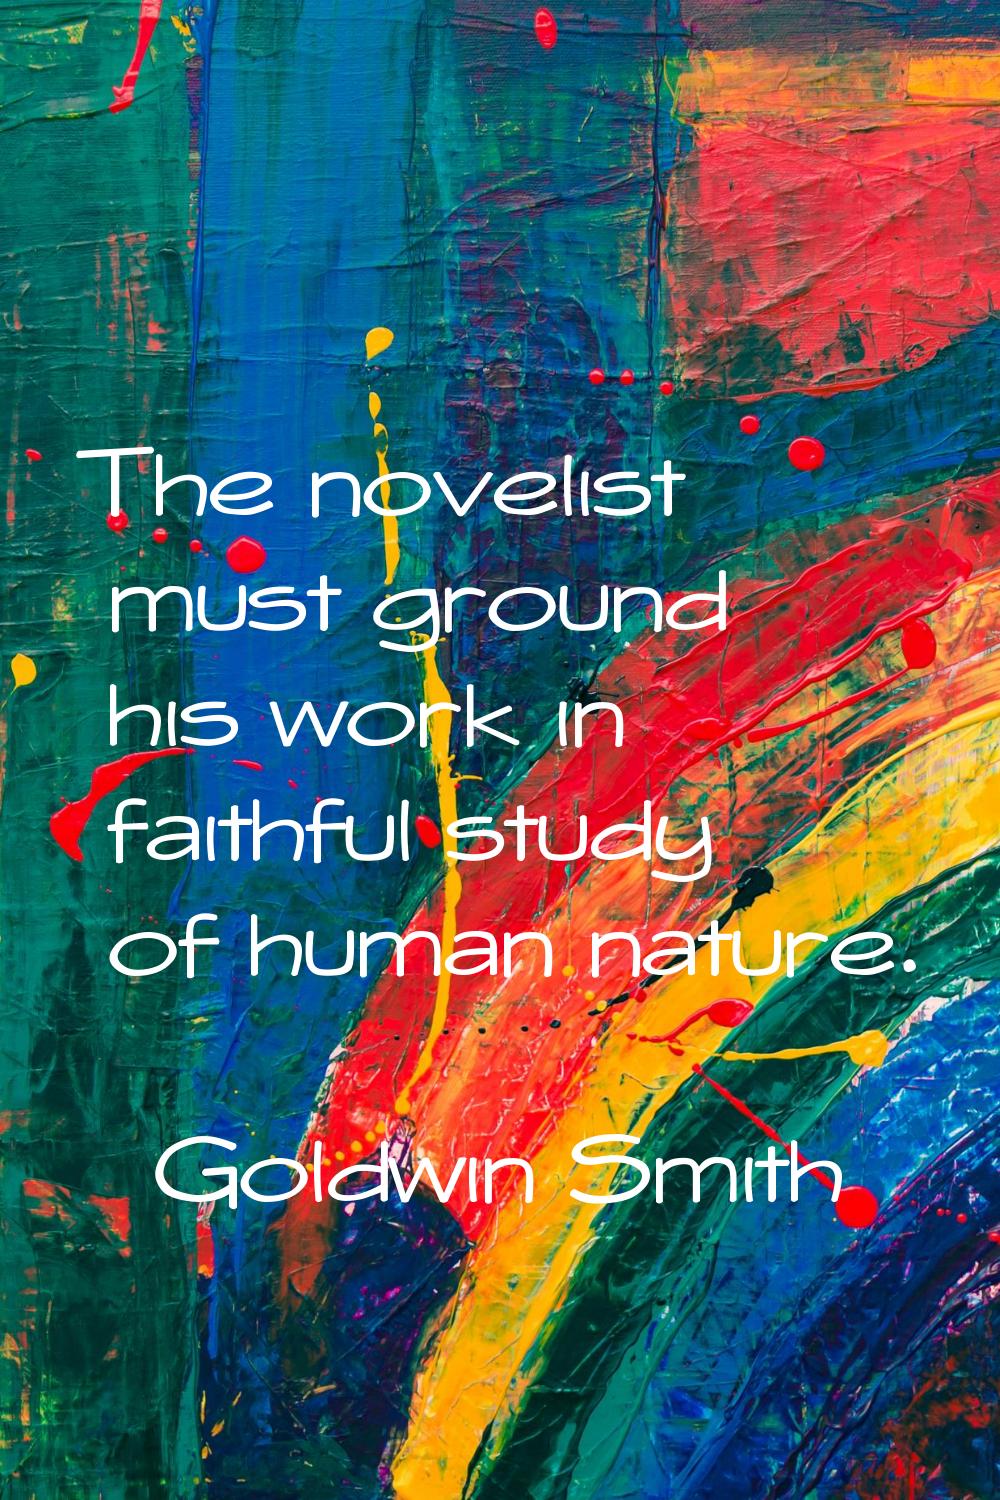 The novelist must ground his work in faithful study of human nature.